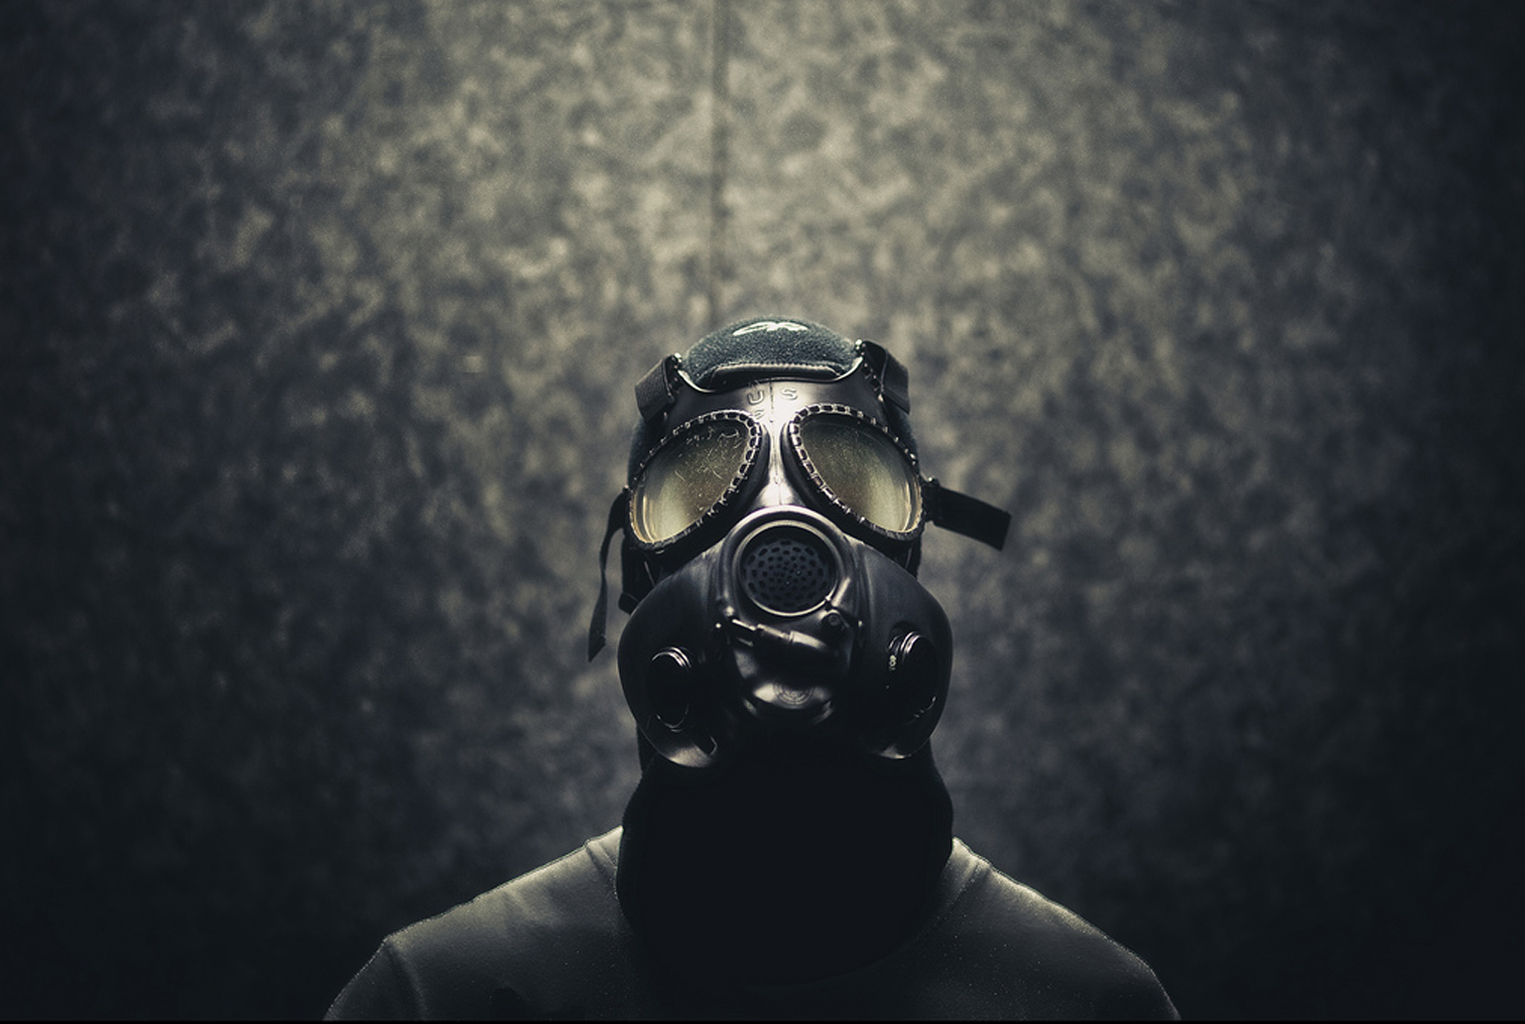 Cool Skull With Gas Mask Wallpaper Descriptions